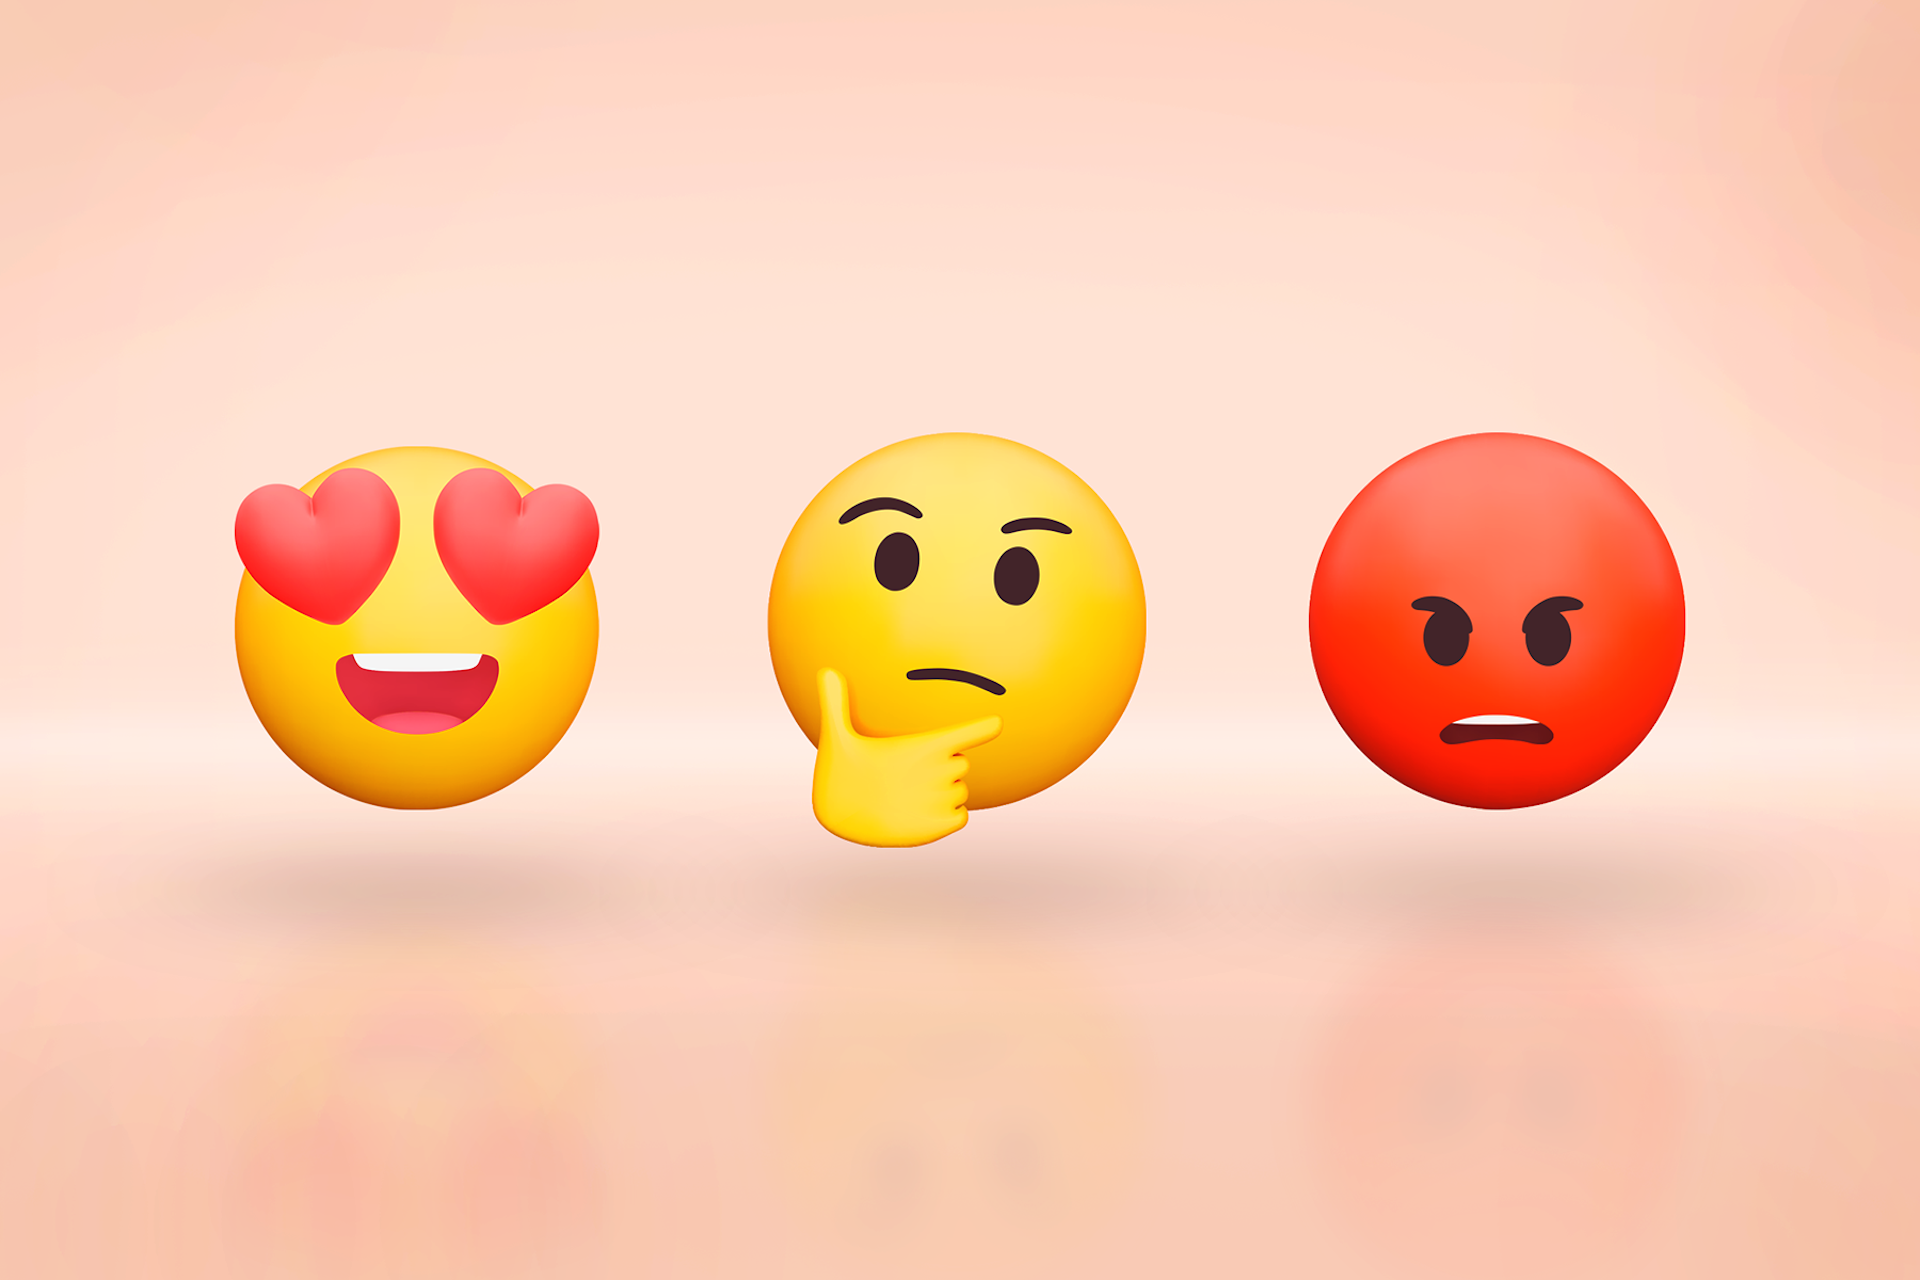 An image showing three large emojis demonstrating different sentiments. The far left emoji has heart eyes, the middle emoji has hand on chin with puzzled expression, the far right emjoi is red and has an angry expression. Blog post image for sentiment analysis